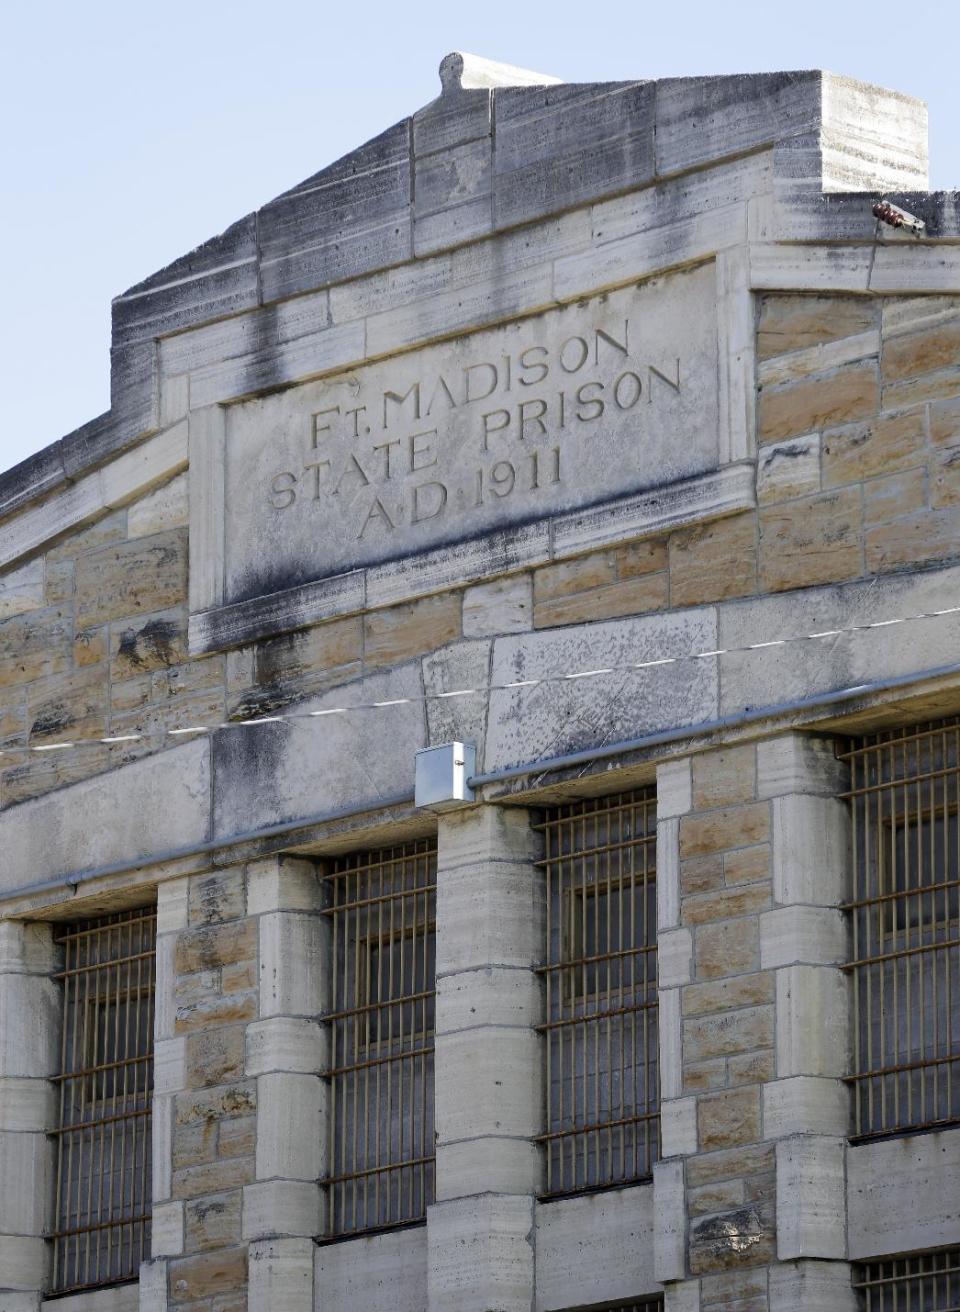 This Monday, Nov. 18, 2013, photo shows the outside of a cell block at the Iowa State Penitentiary, in Fort Madison, Iowa. The penitentiary, the oldest in use west of the Mississippi River with a history dating back to 1839, is set to close when a $130 million replacement opens down the road next year. (AP Photo/Charlie Neibergall)